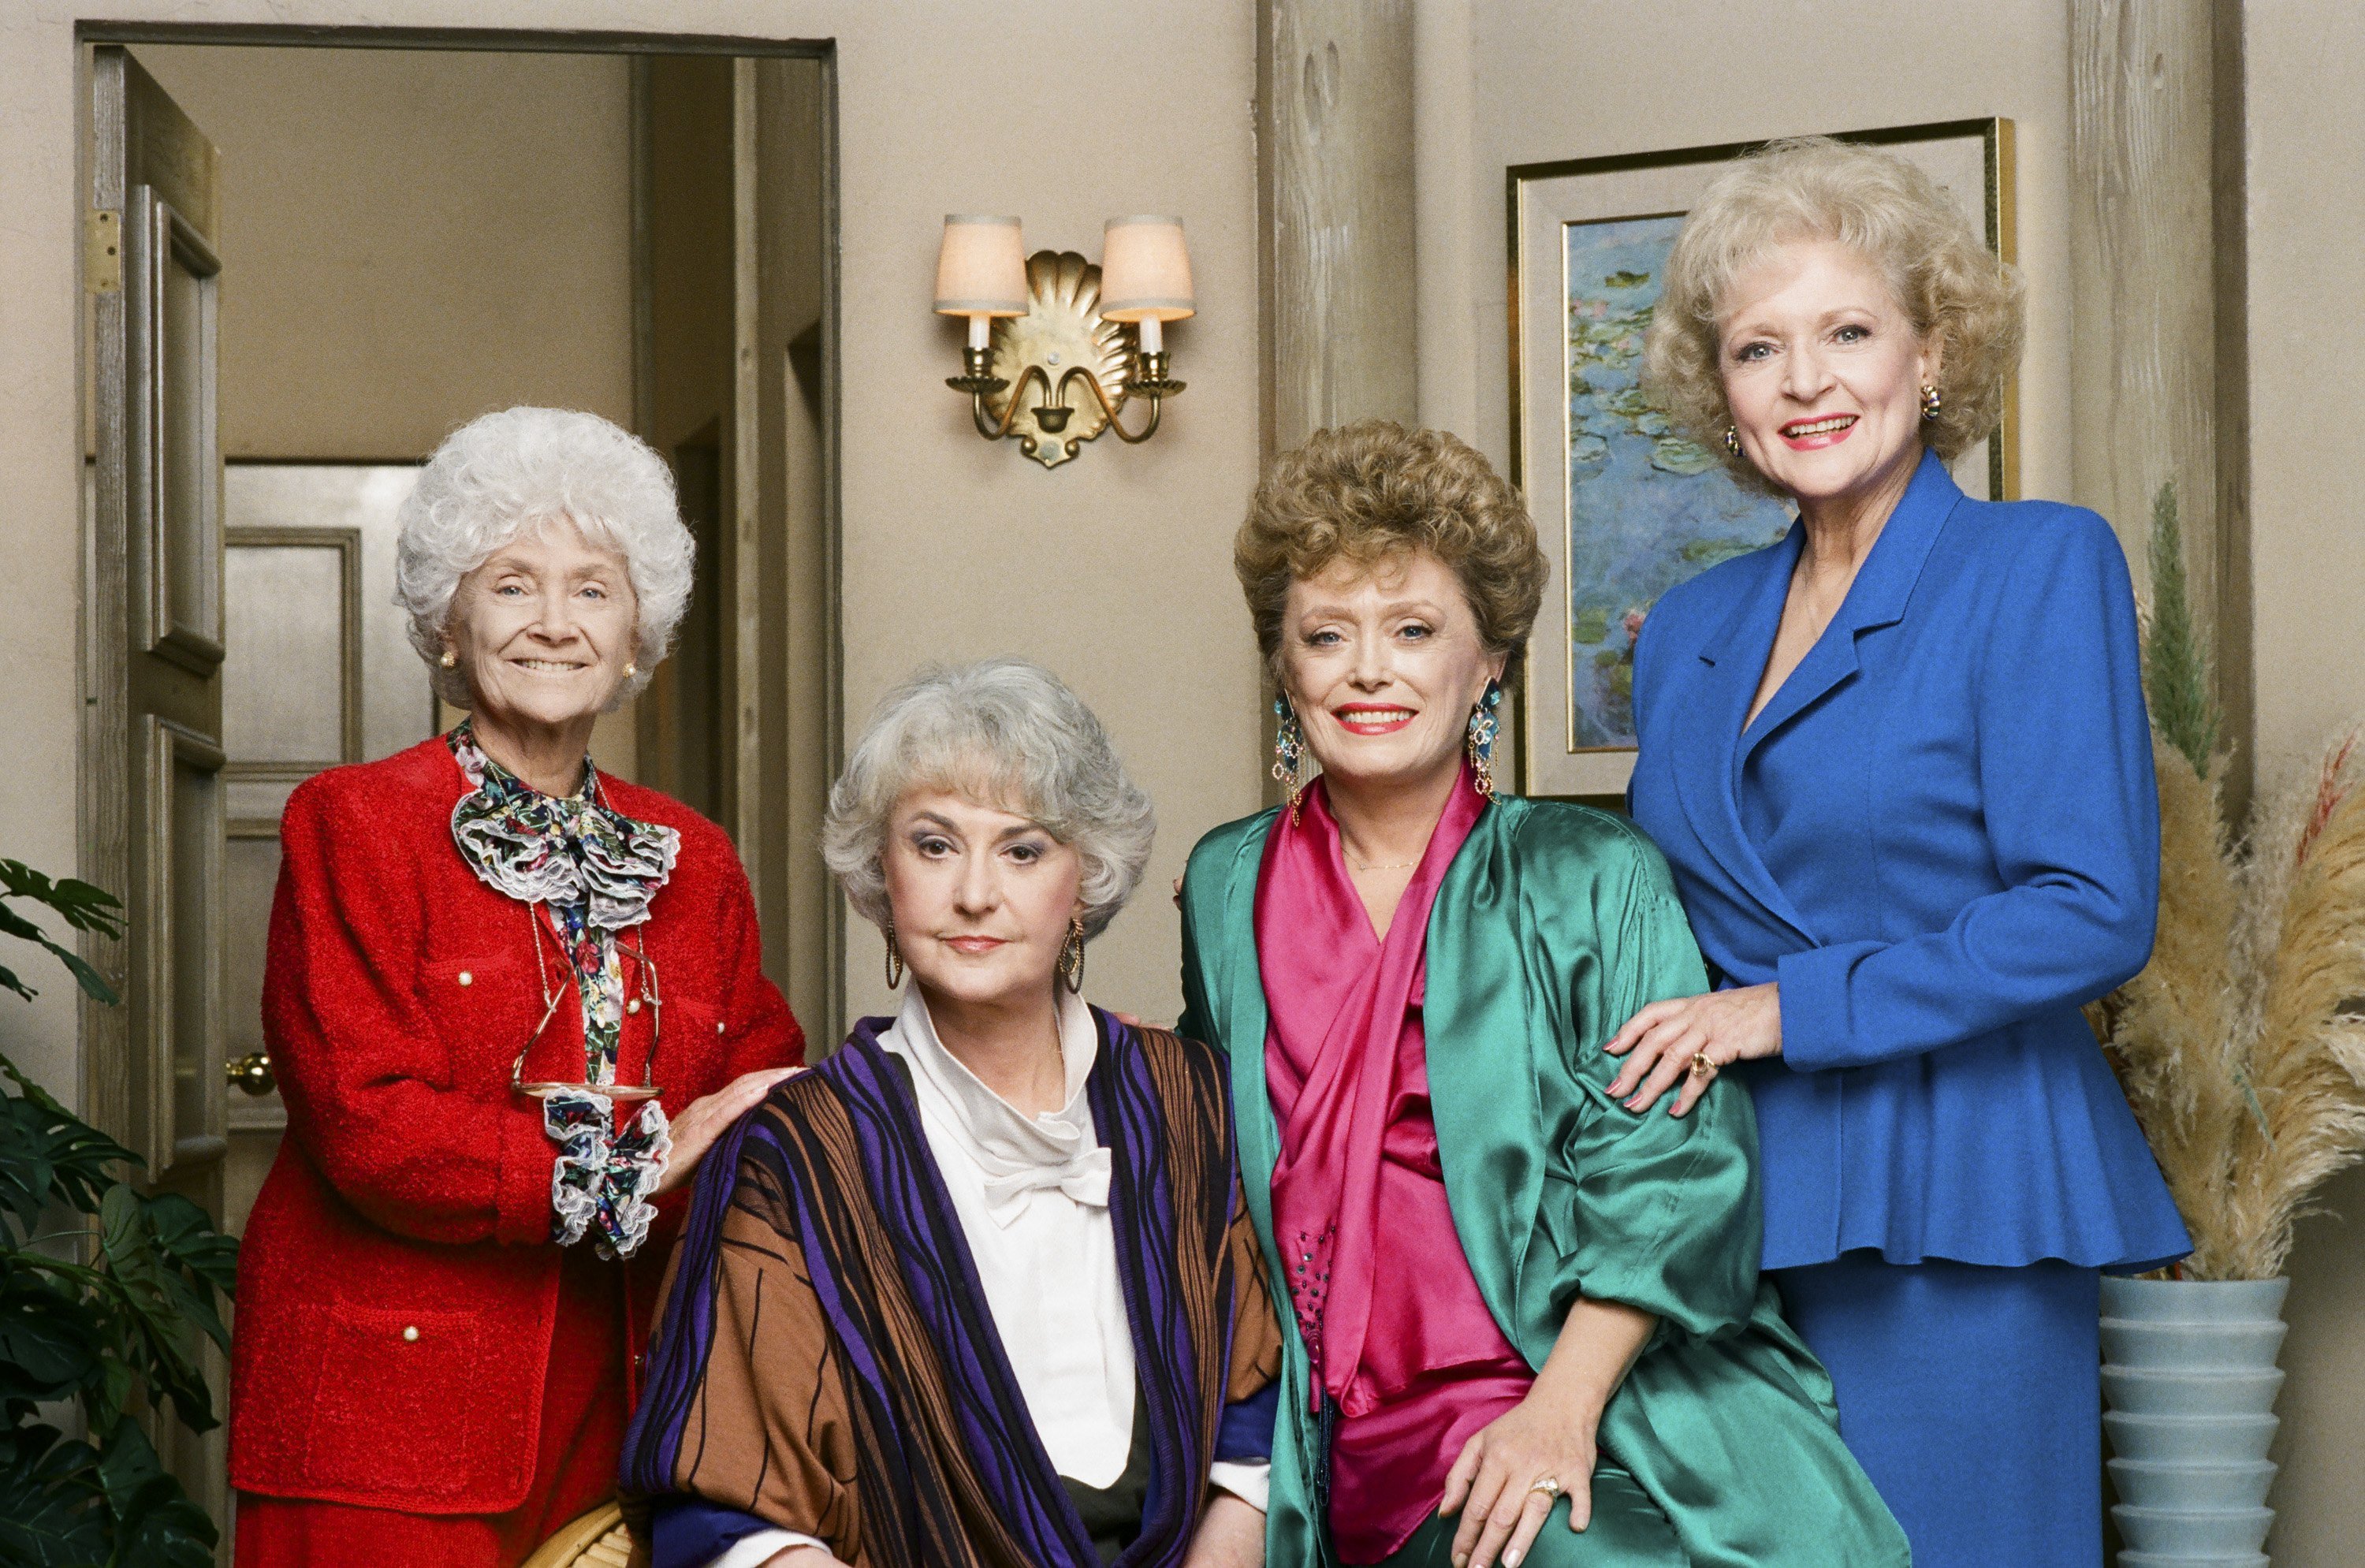 Pictured: (l-r) Estelle Getty, Bea Arthur, Rue McClanahan and Betty White on "The Golden Girls" Season 4 | Photo: Getty Images